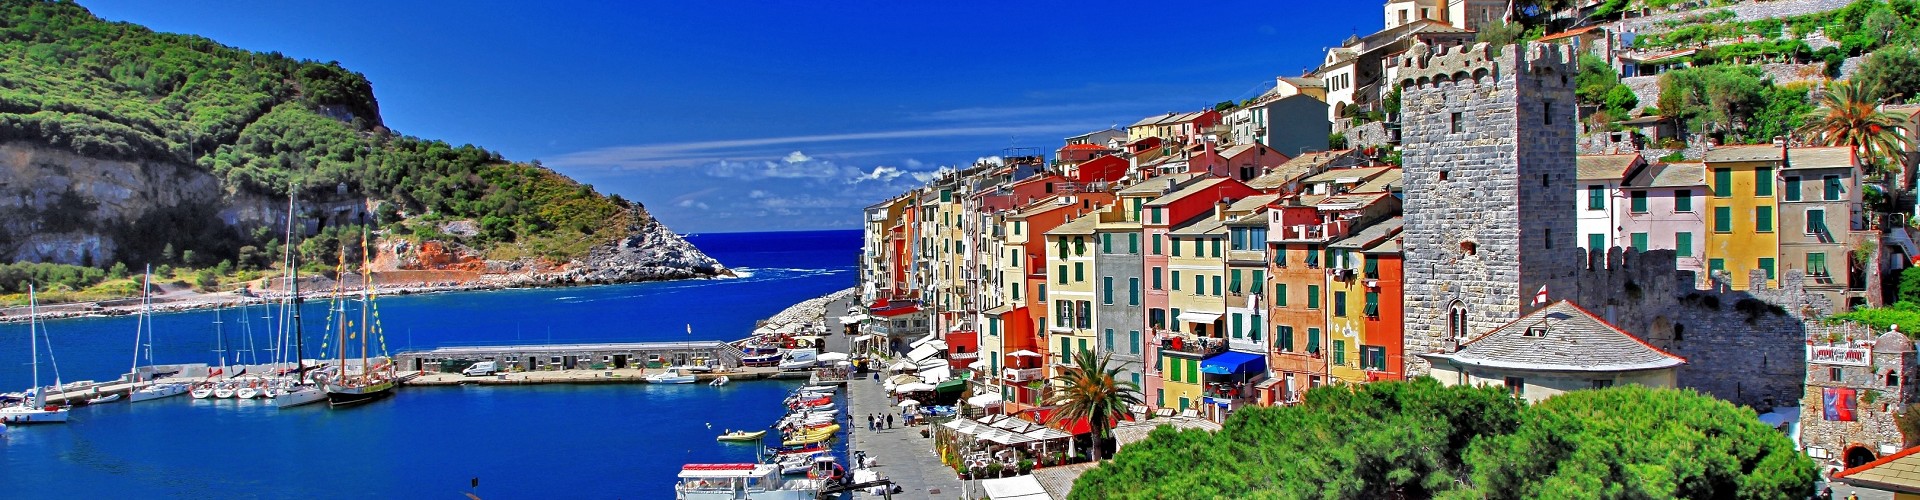 Best way to get from la Spezia to Portovenere | Private Transport from Antibes to Genoa